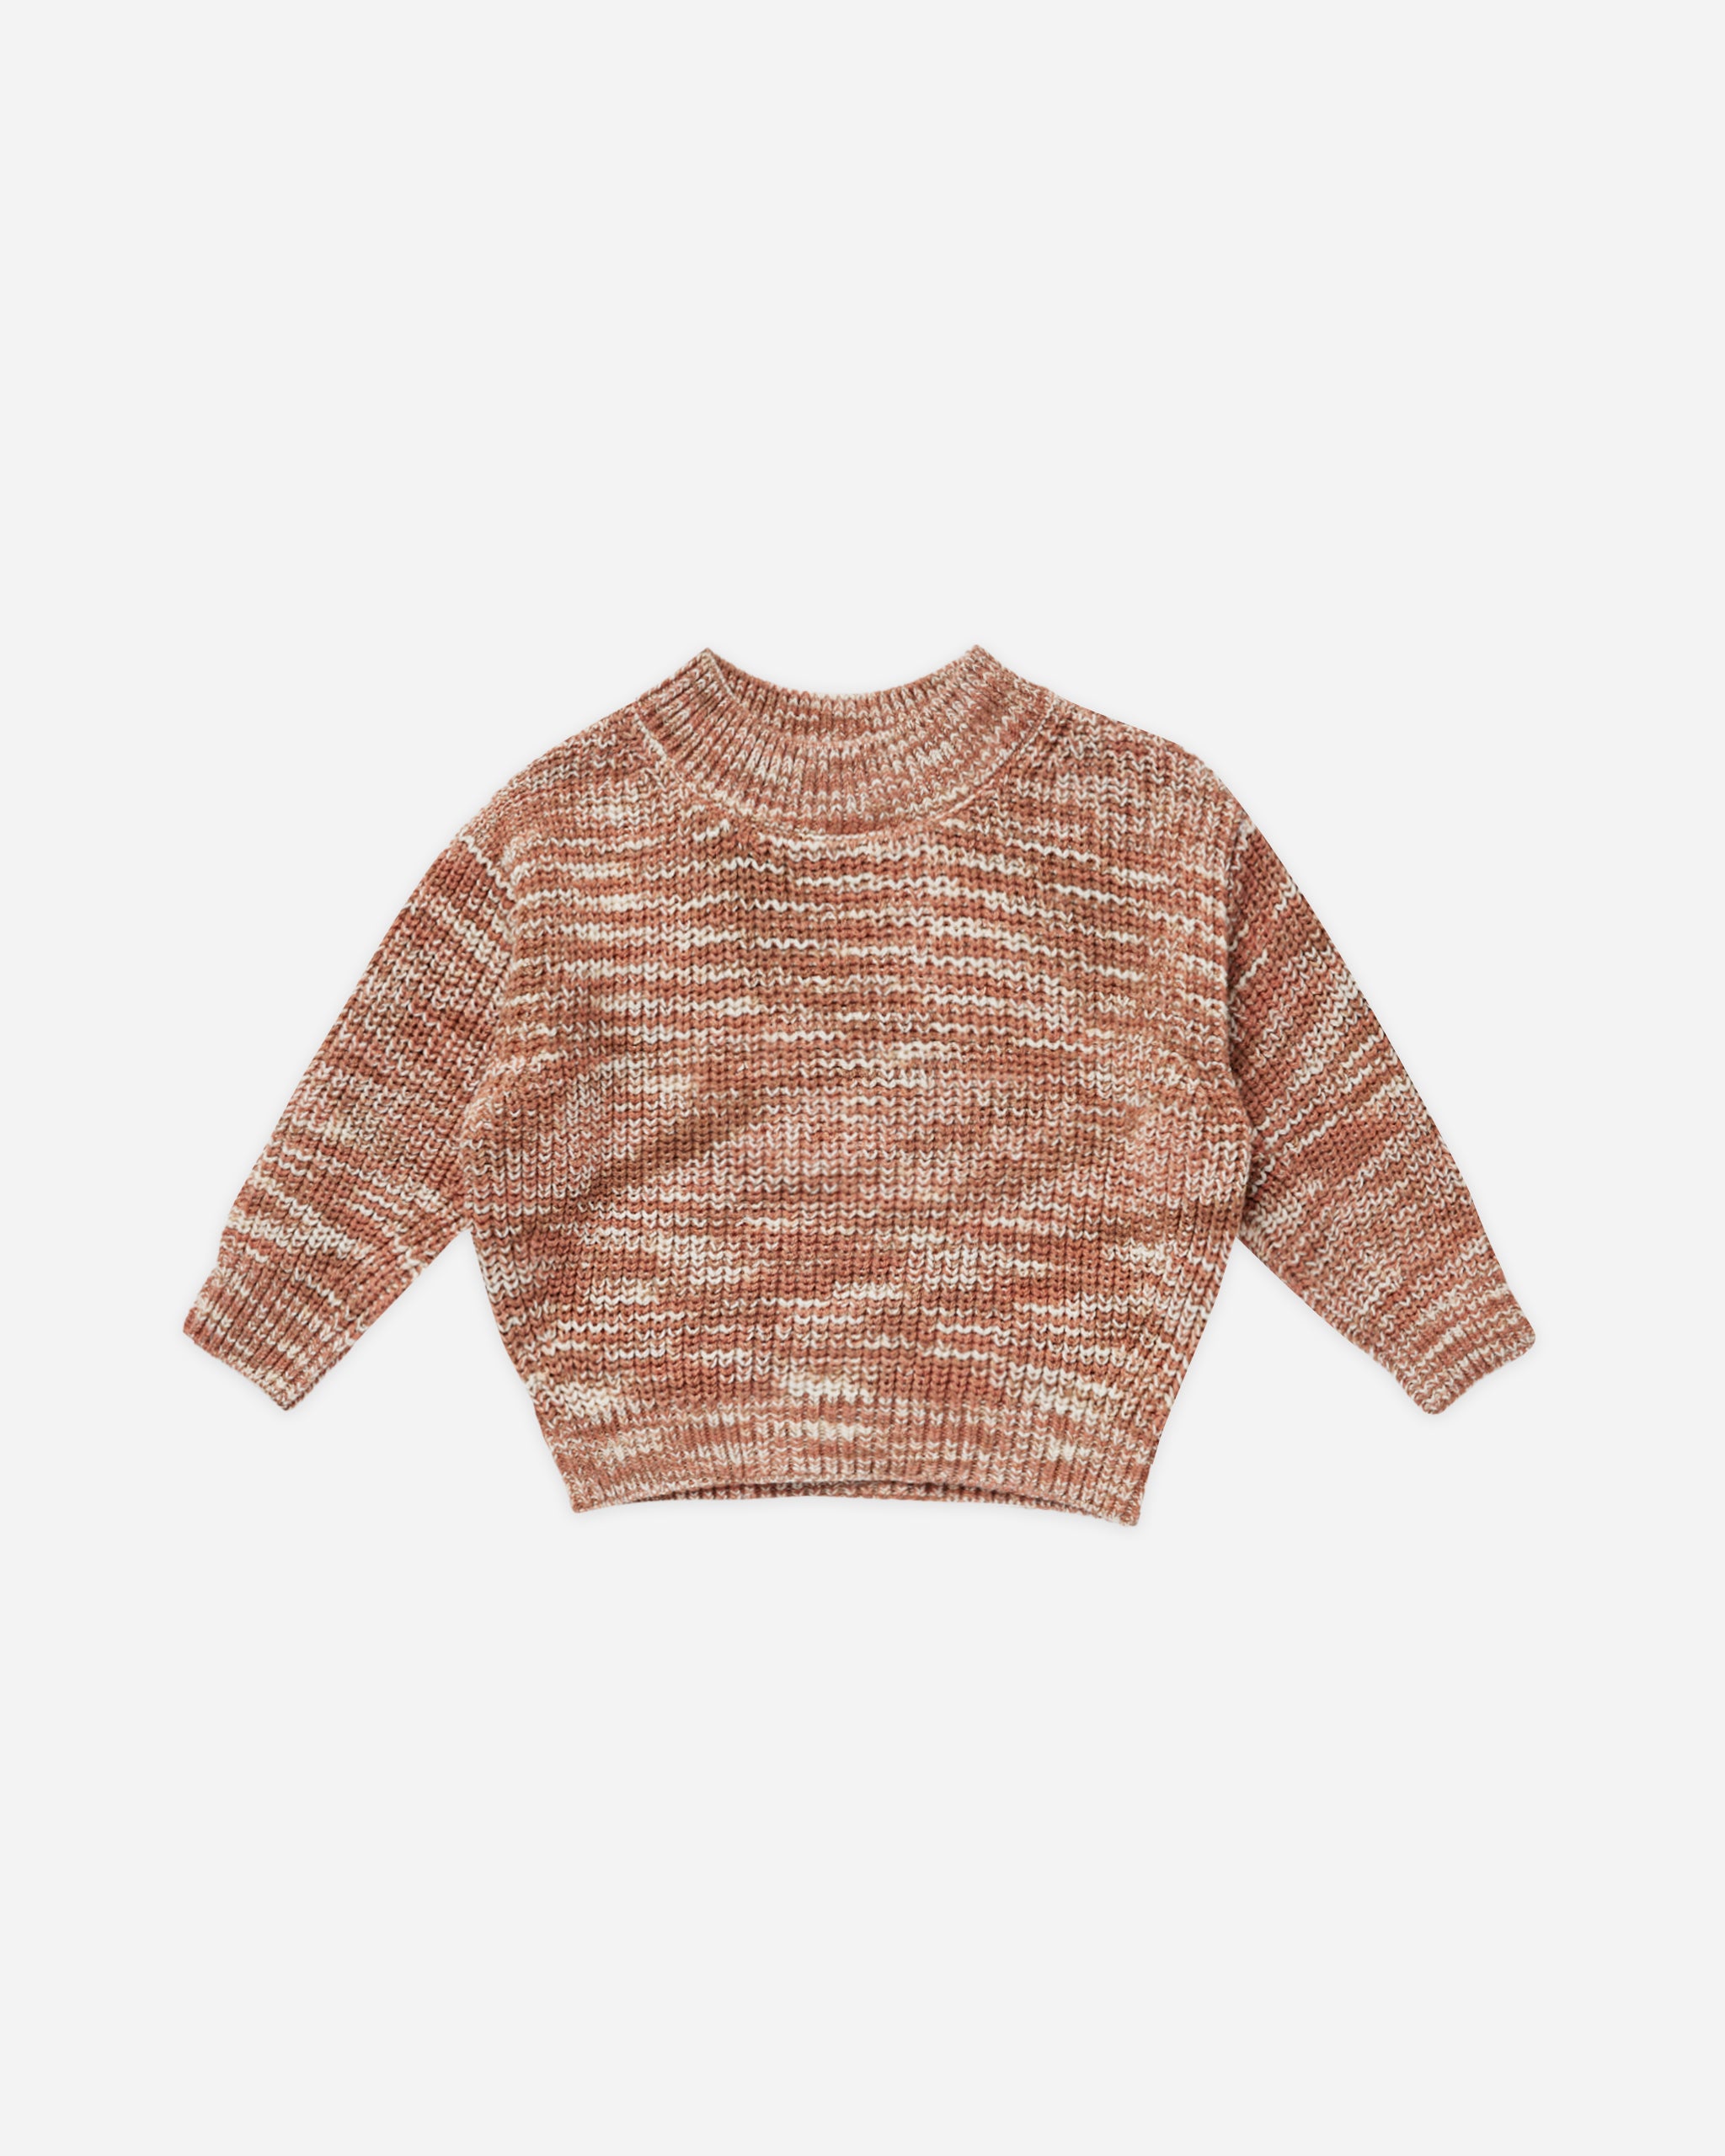 Relaxed Knit Sweater || Heathered Spice - Rylee + Cru | Kids Clothes | Trendy Baby Clothes | Modern Infant Outfits |